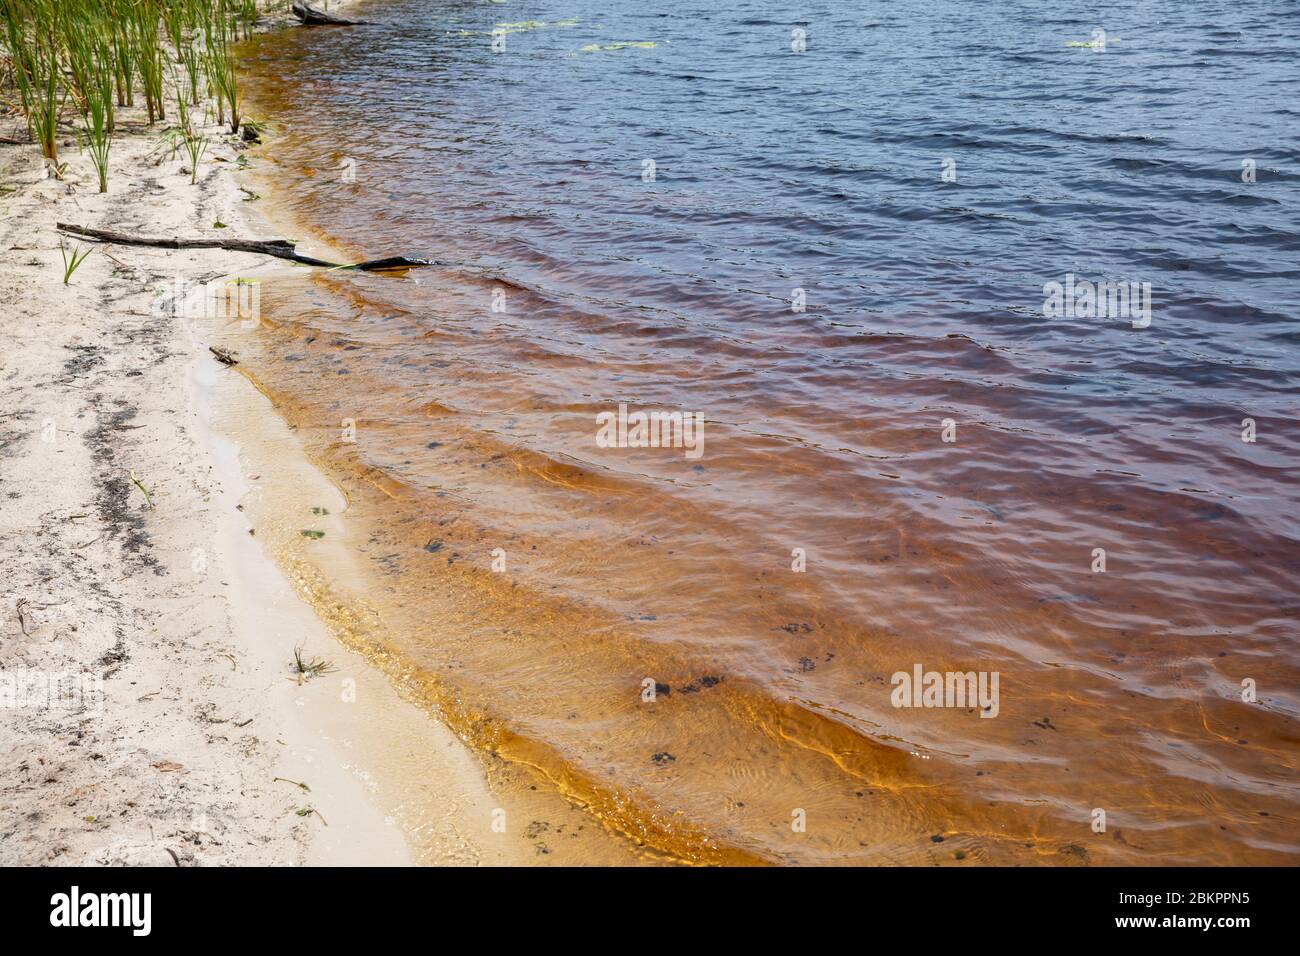 Lake Ainsworth in Lennox Head, dunal freshwater lake tea tree stained brown from the surrounding trees,New South Wales,Australia Stock Photo